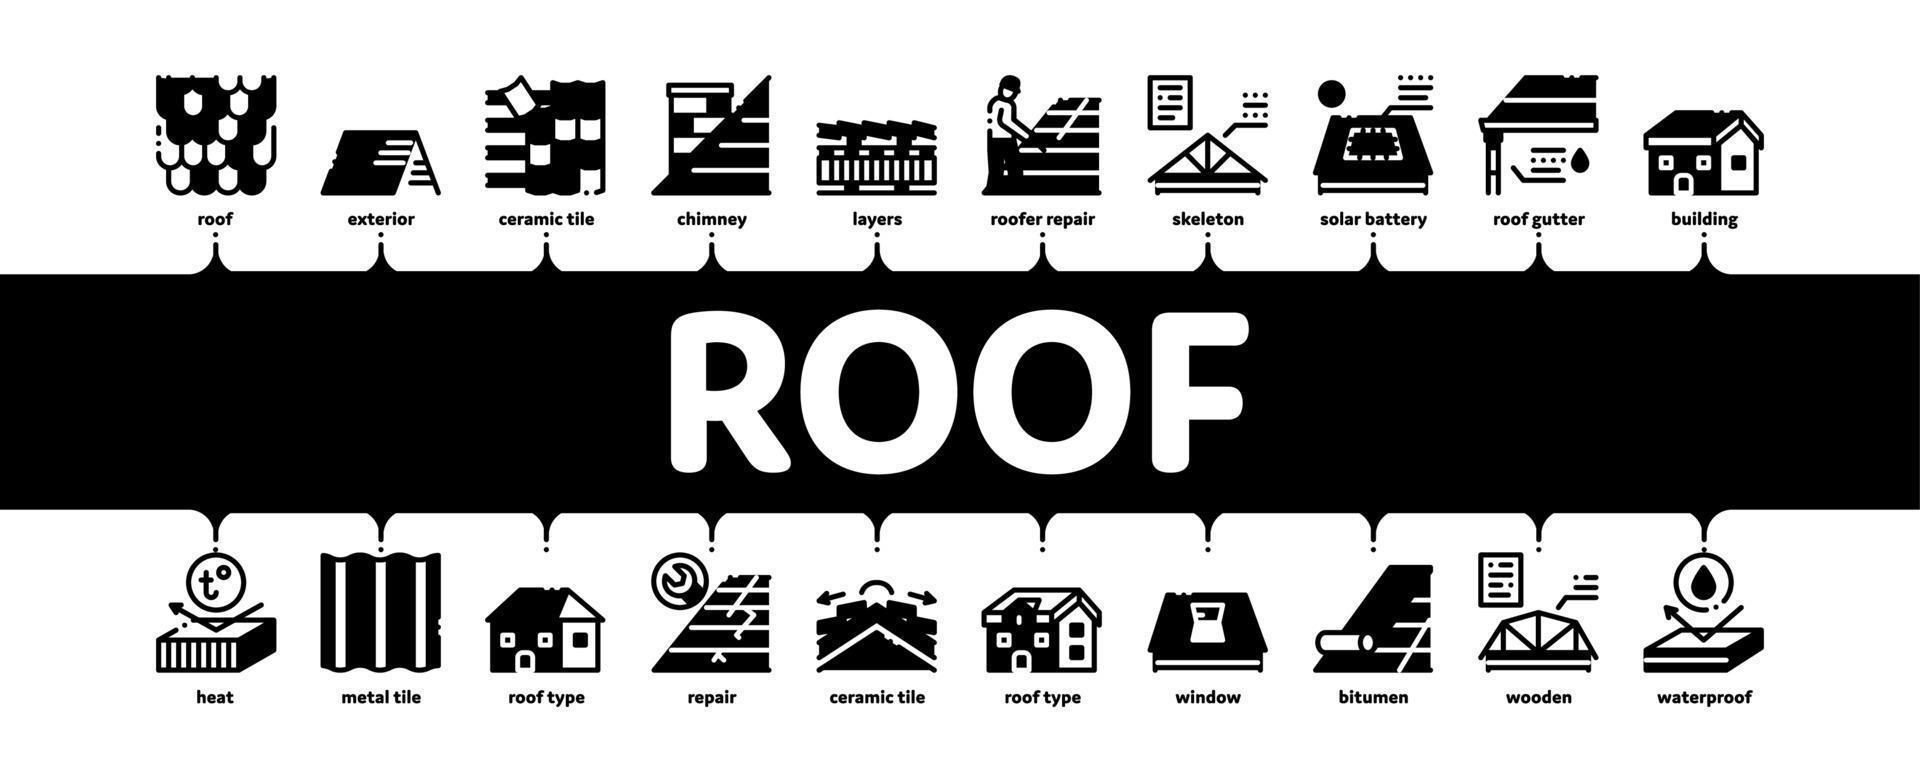 Roof Housetop Material Minimal Infographic Banner Vector